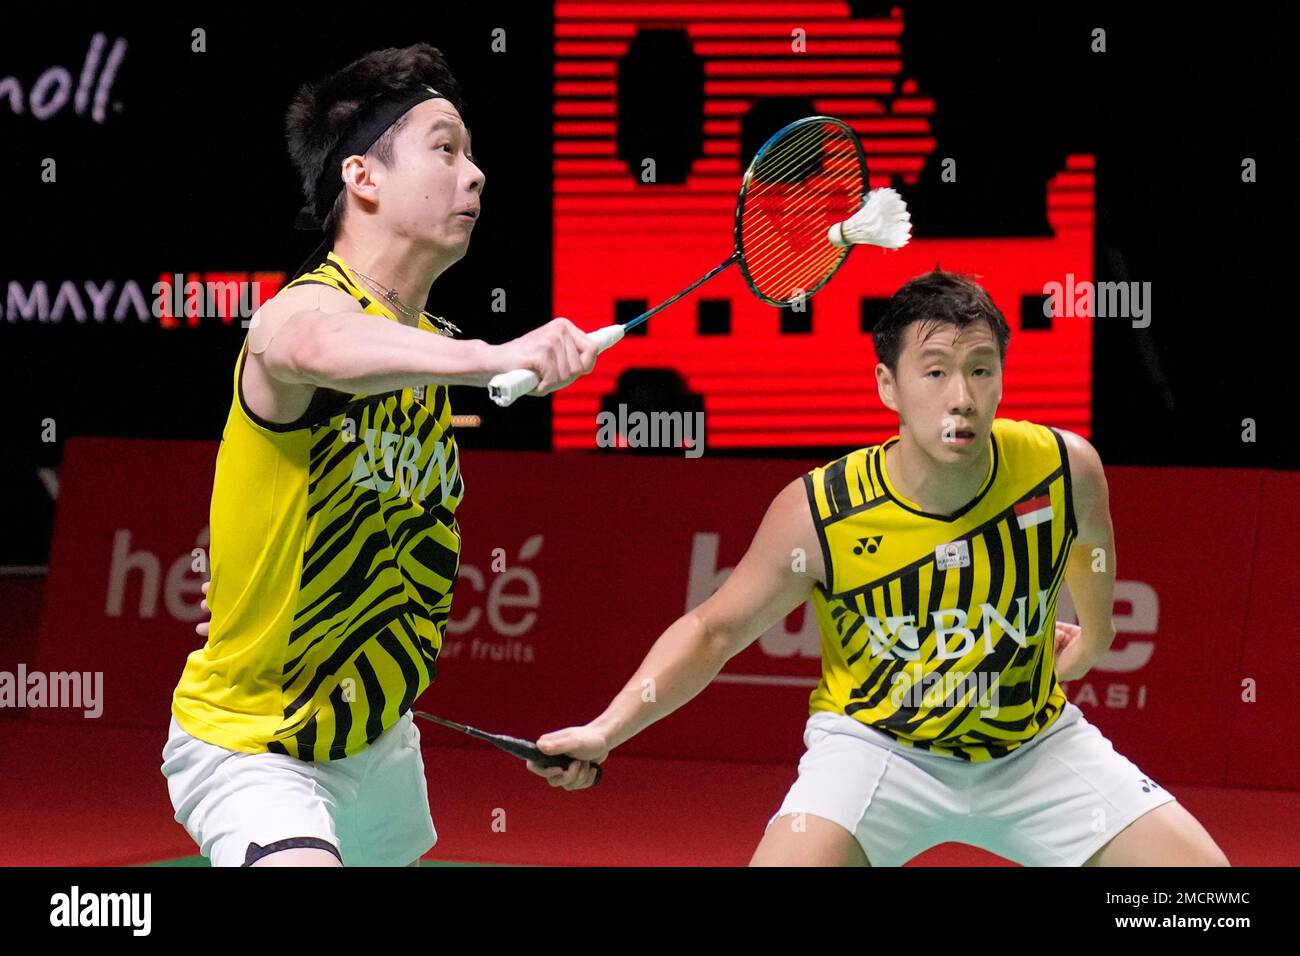 Indonesia's Kevin Sanjaya Sukamuljo, left, and Marcus Gideon compete  against Taiwan's Lee Yang and Wang Chi Lin compete during their men's  doubles Group A badminton match at the BWF World Tour Finals